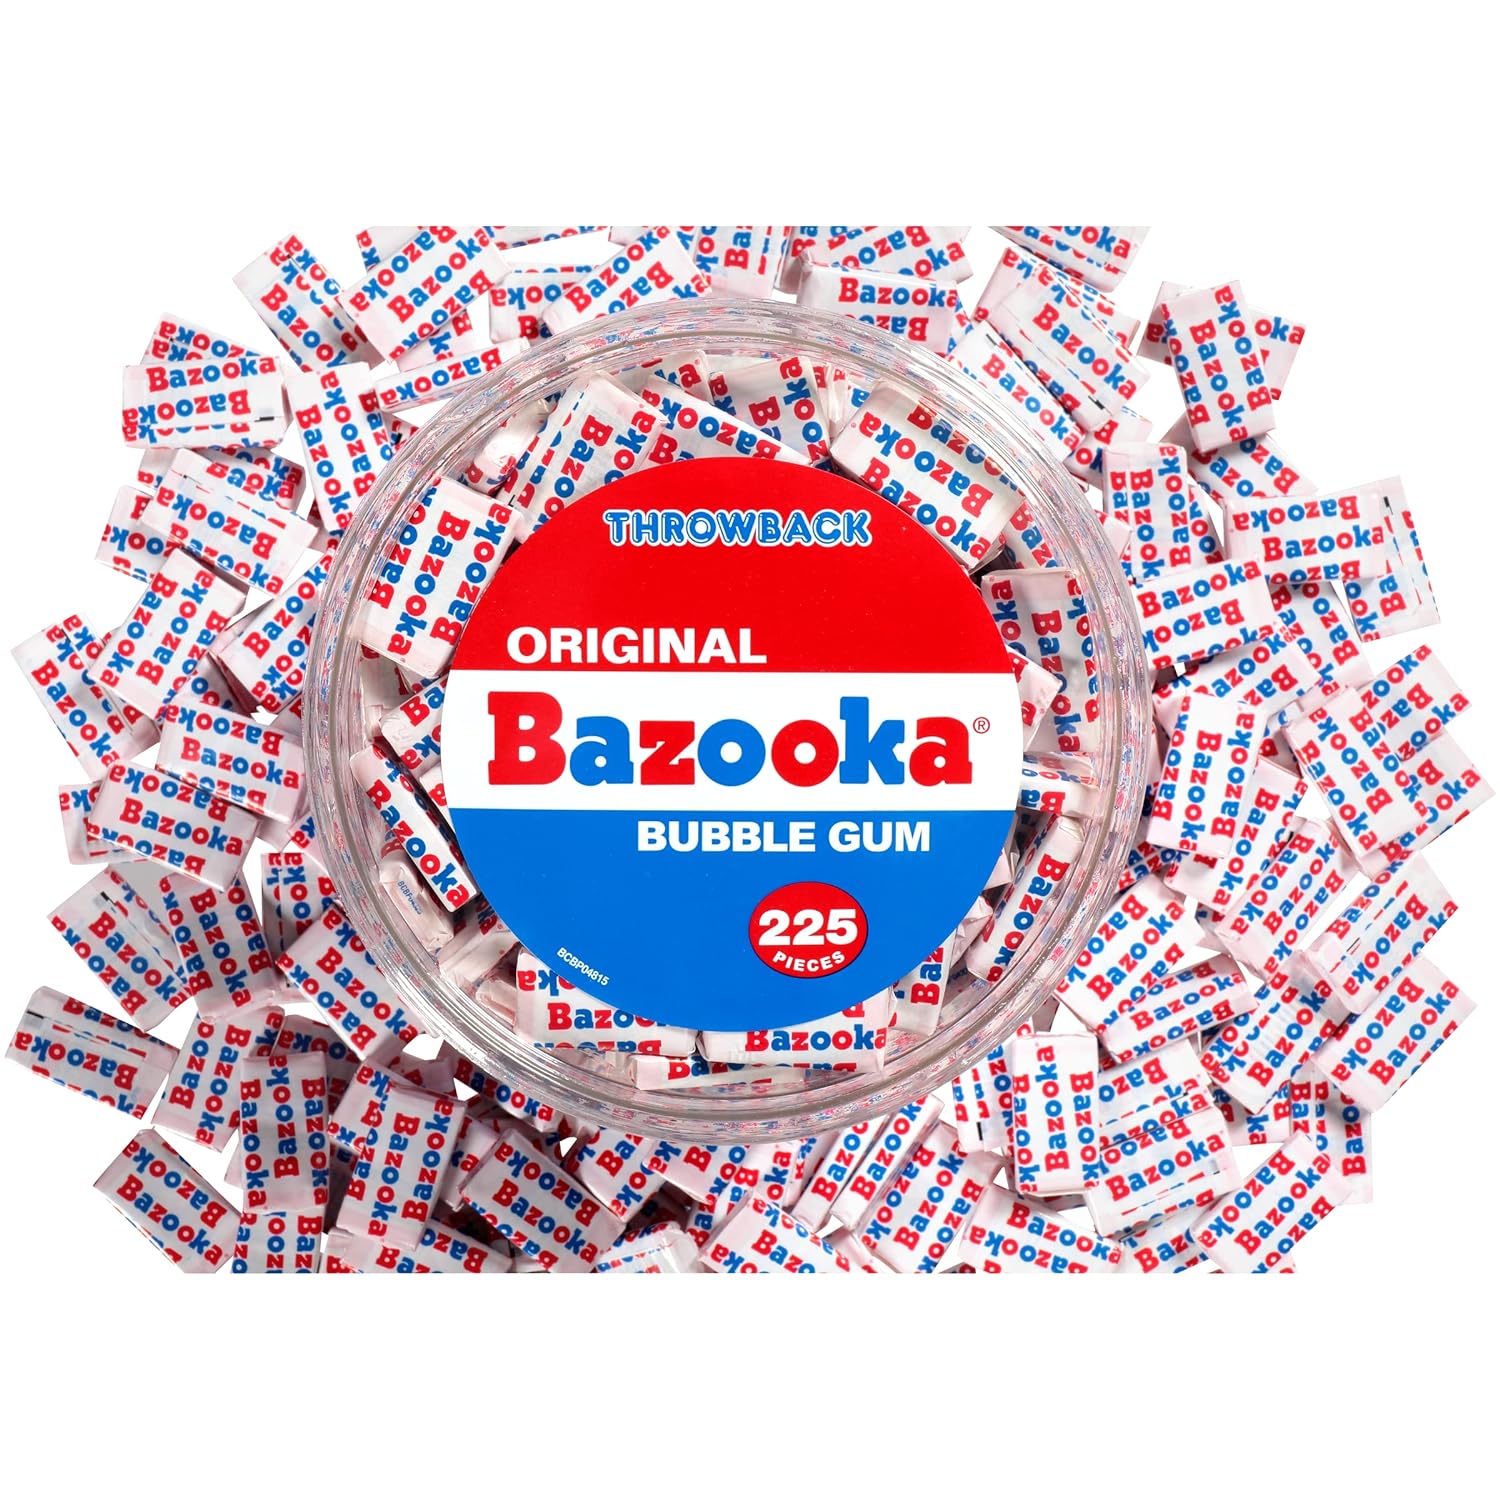 Bazooka Bubble Gum Individually Wrapped Pink Chewing Gum in 